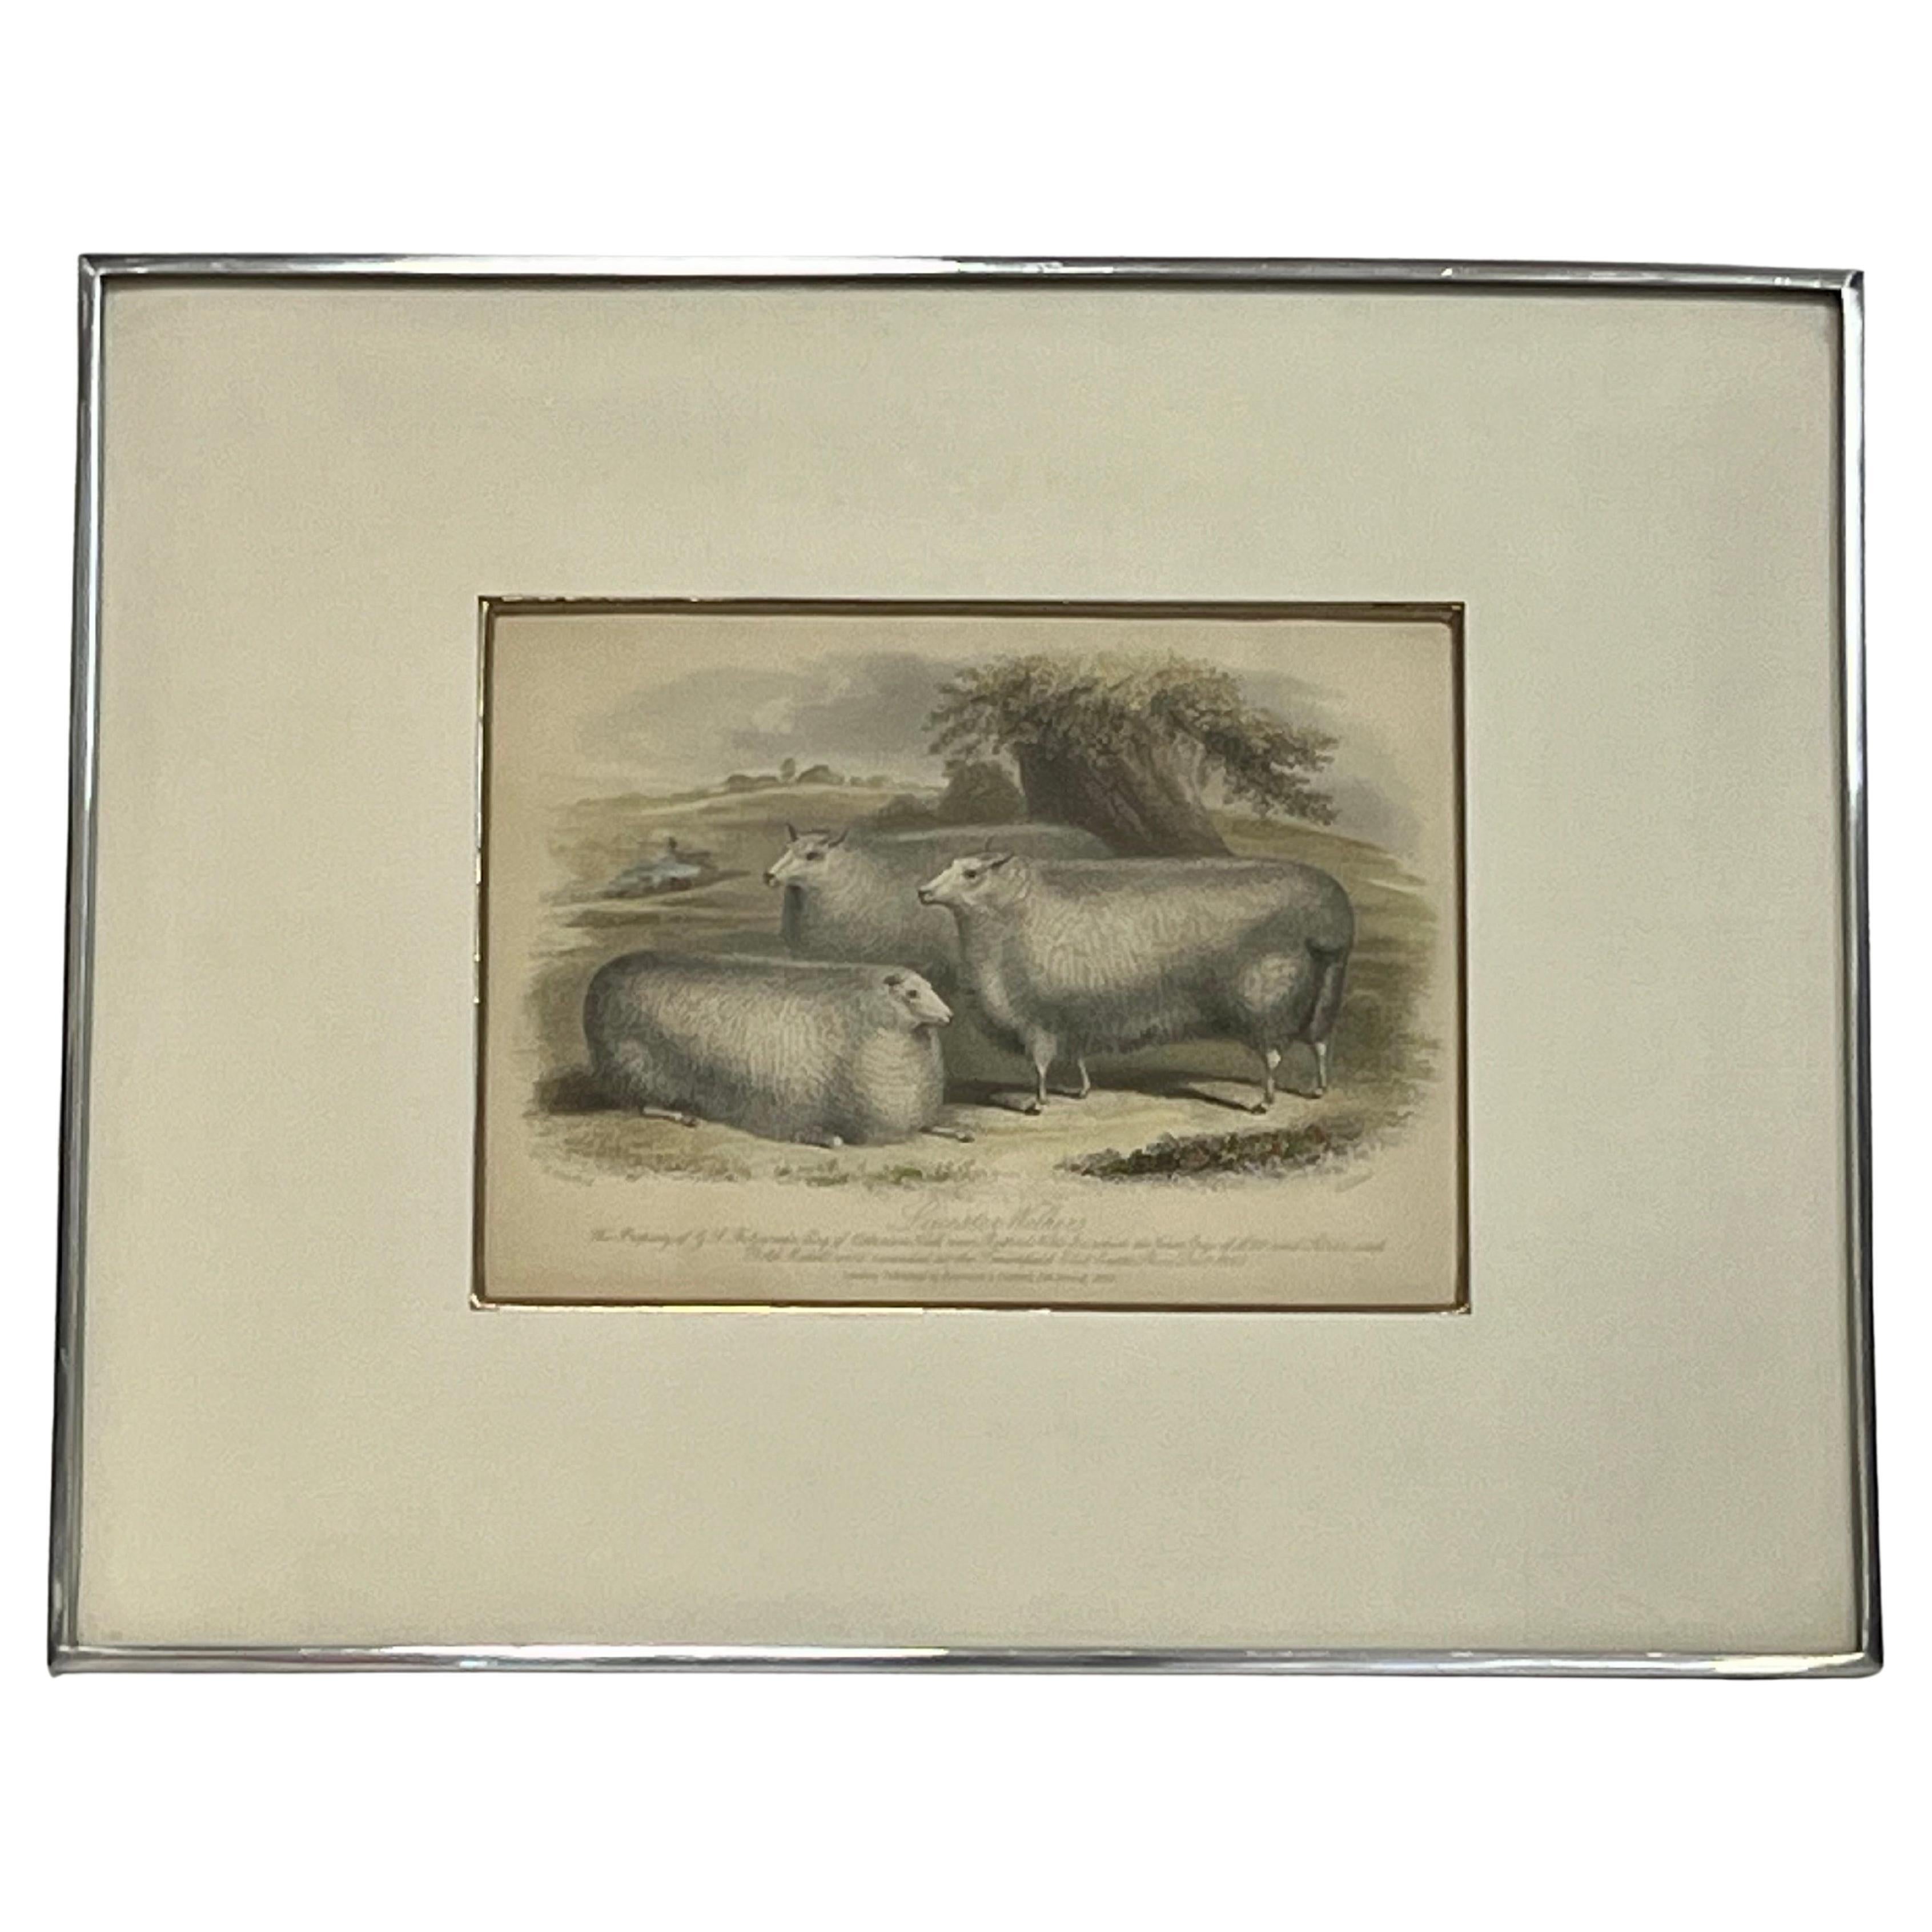 19th Century British Print by H. Stafford of Leicester Wethers in Kulicke Frame